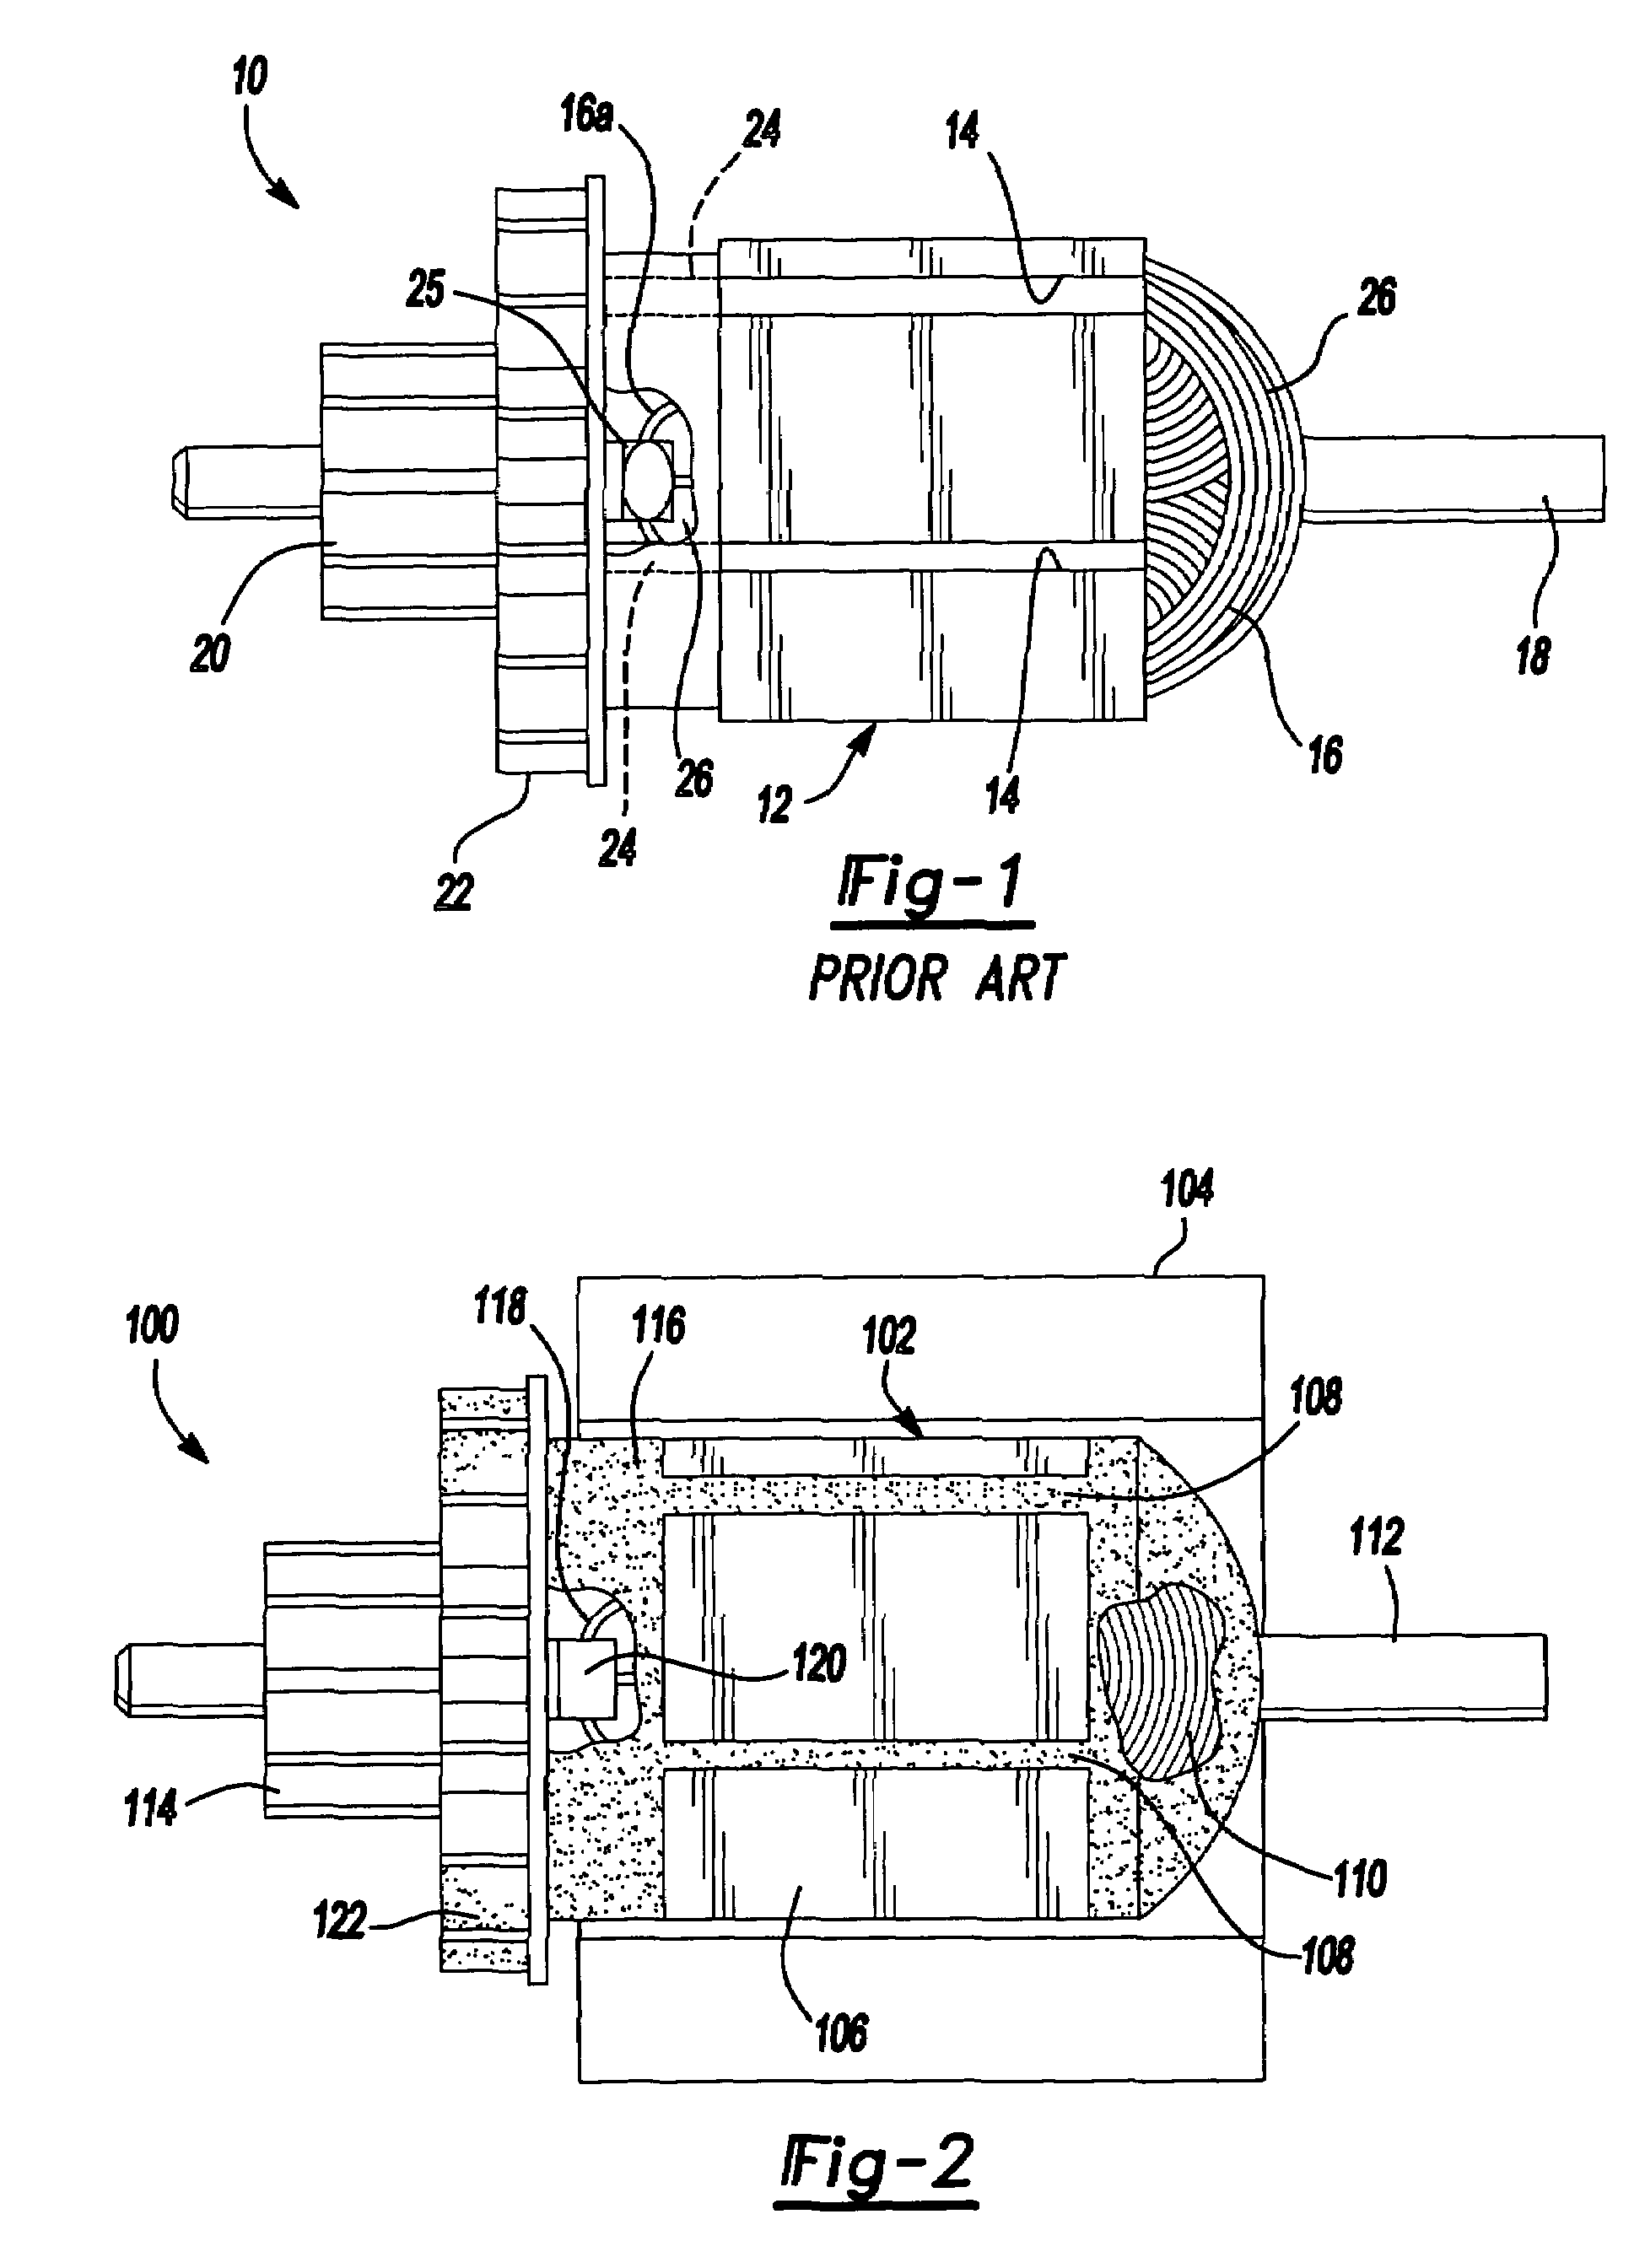 Method for forming an armature for an electric motor for a portable power tool